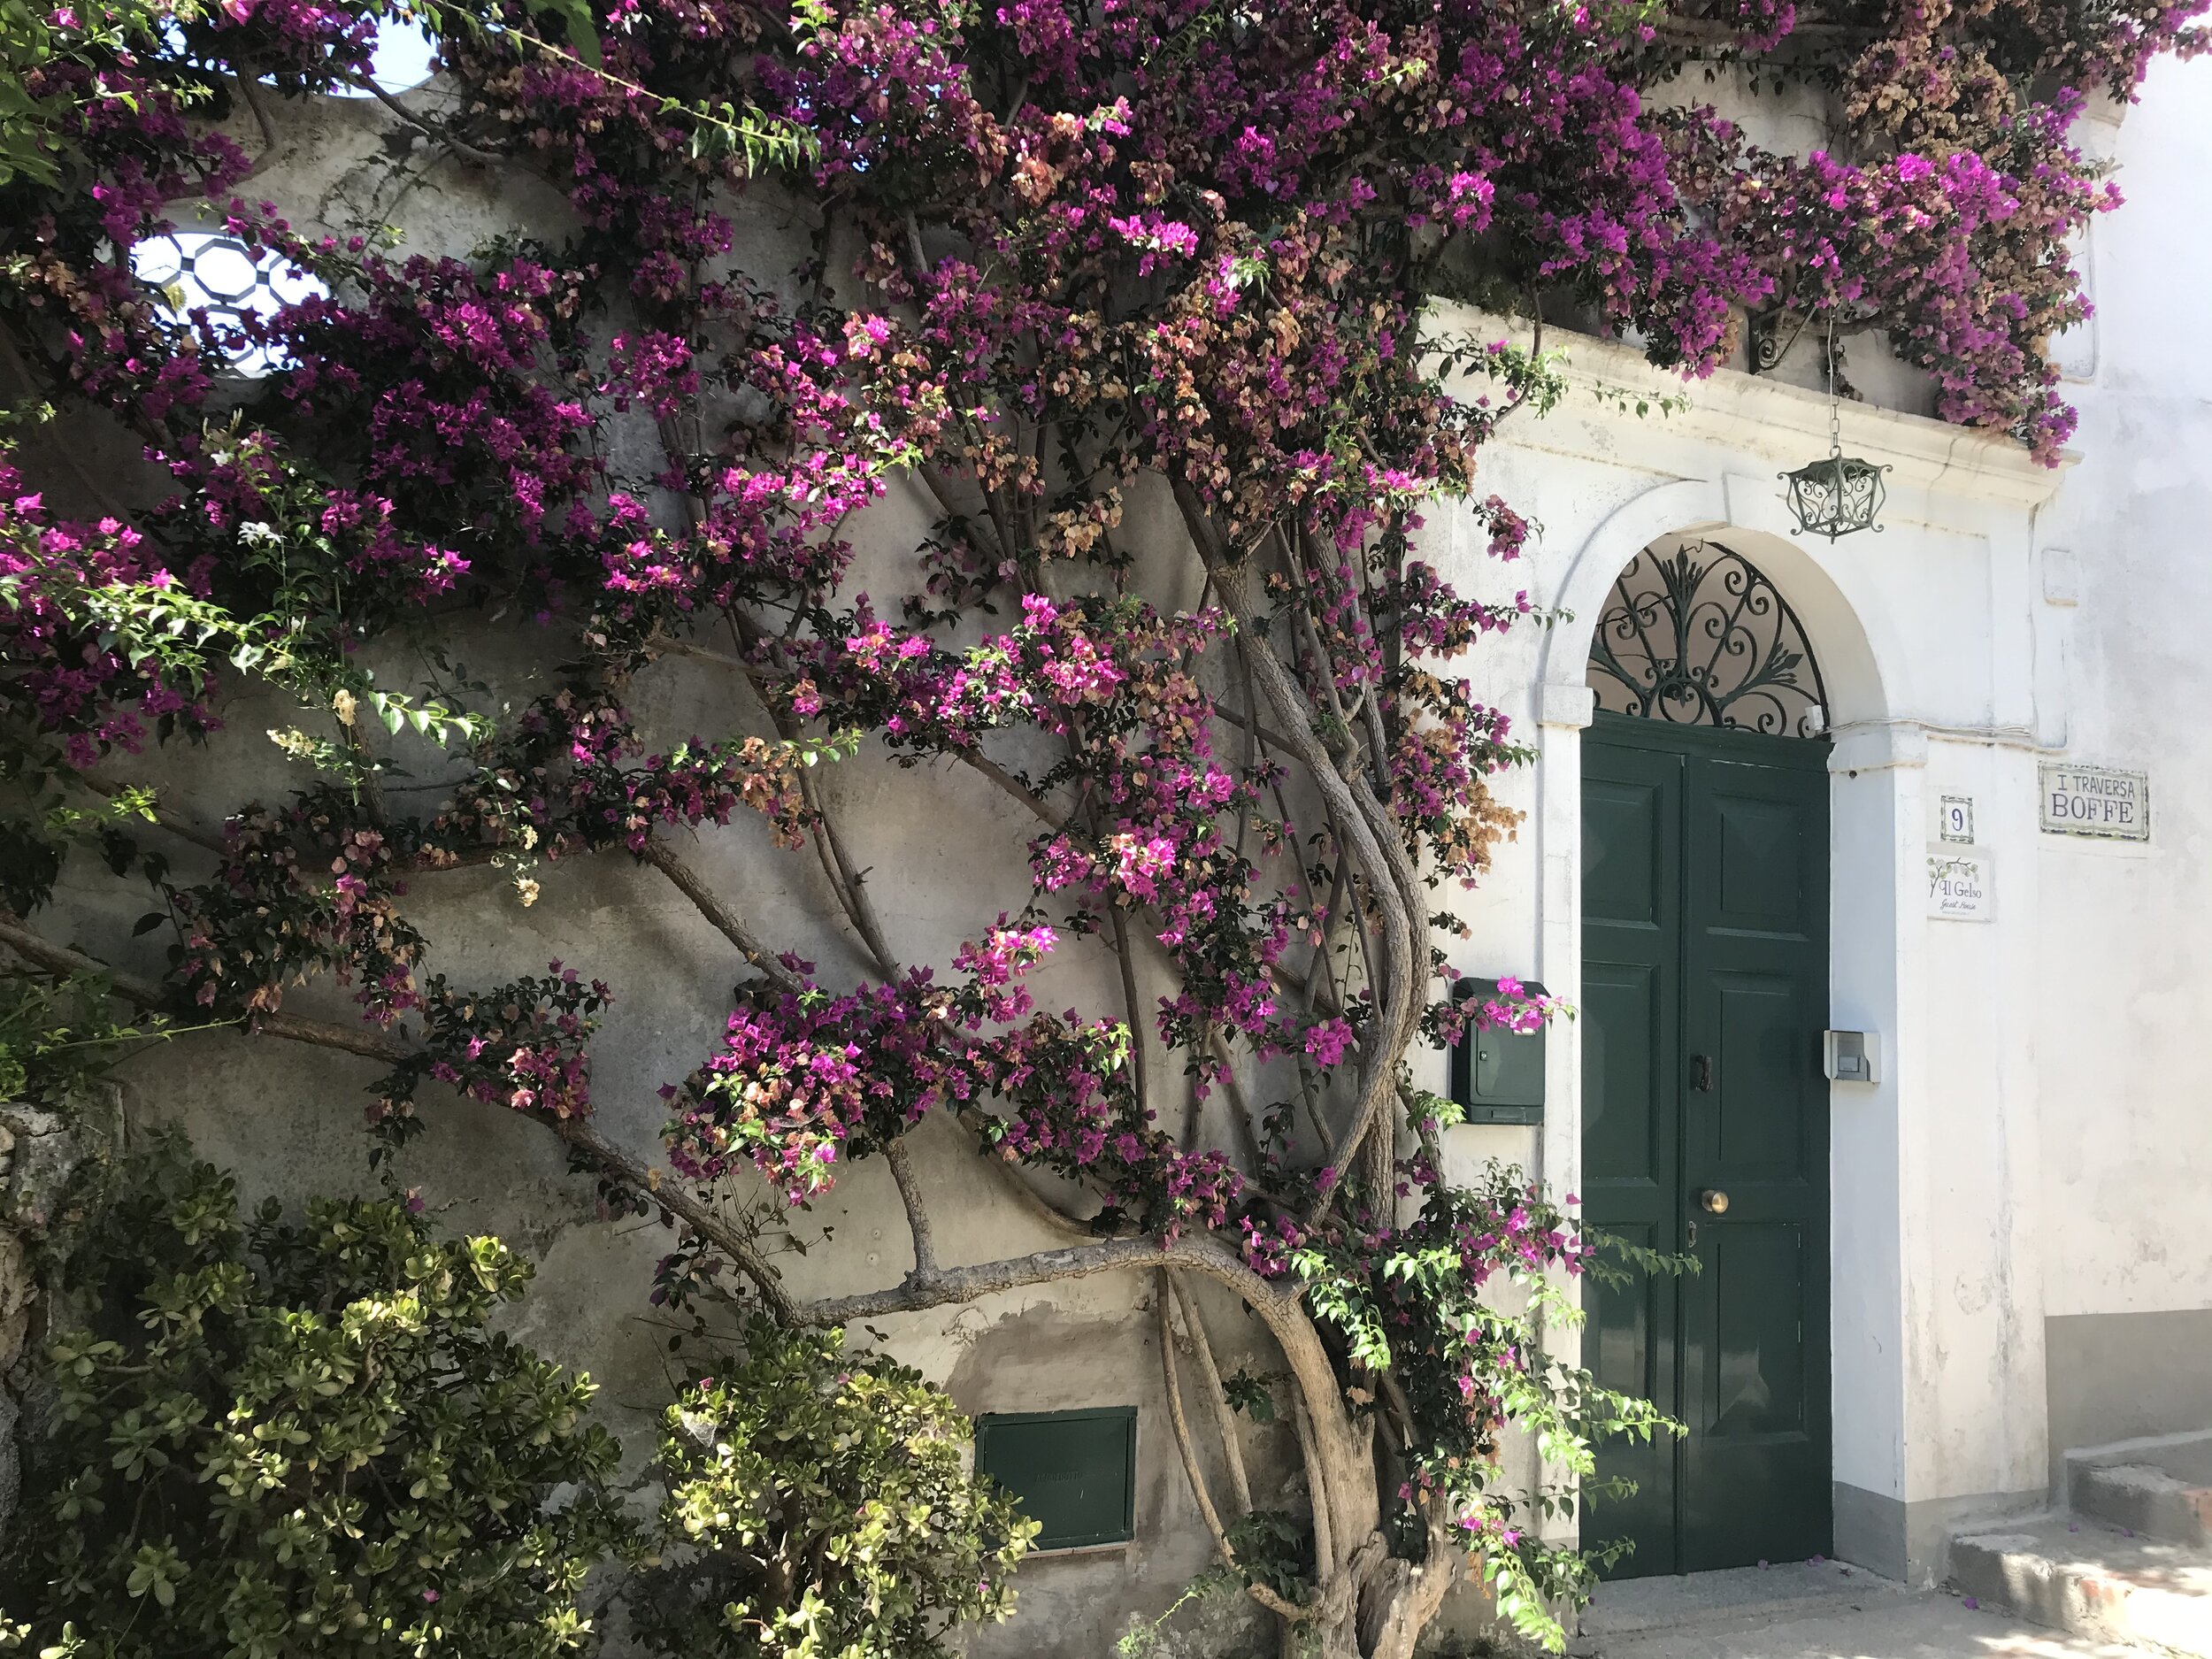  CAPRI, Napoli. August 4th, 2020. PICTURED: A stunningly old flower bush has slowly taken over the doorway of a small house in the hills above Capri. 